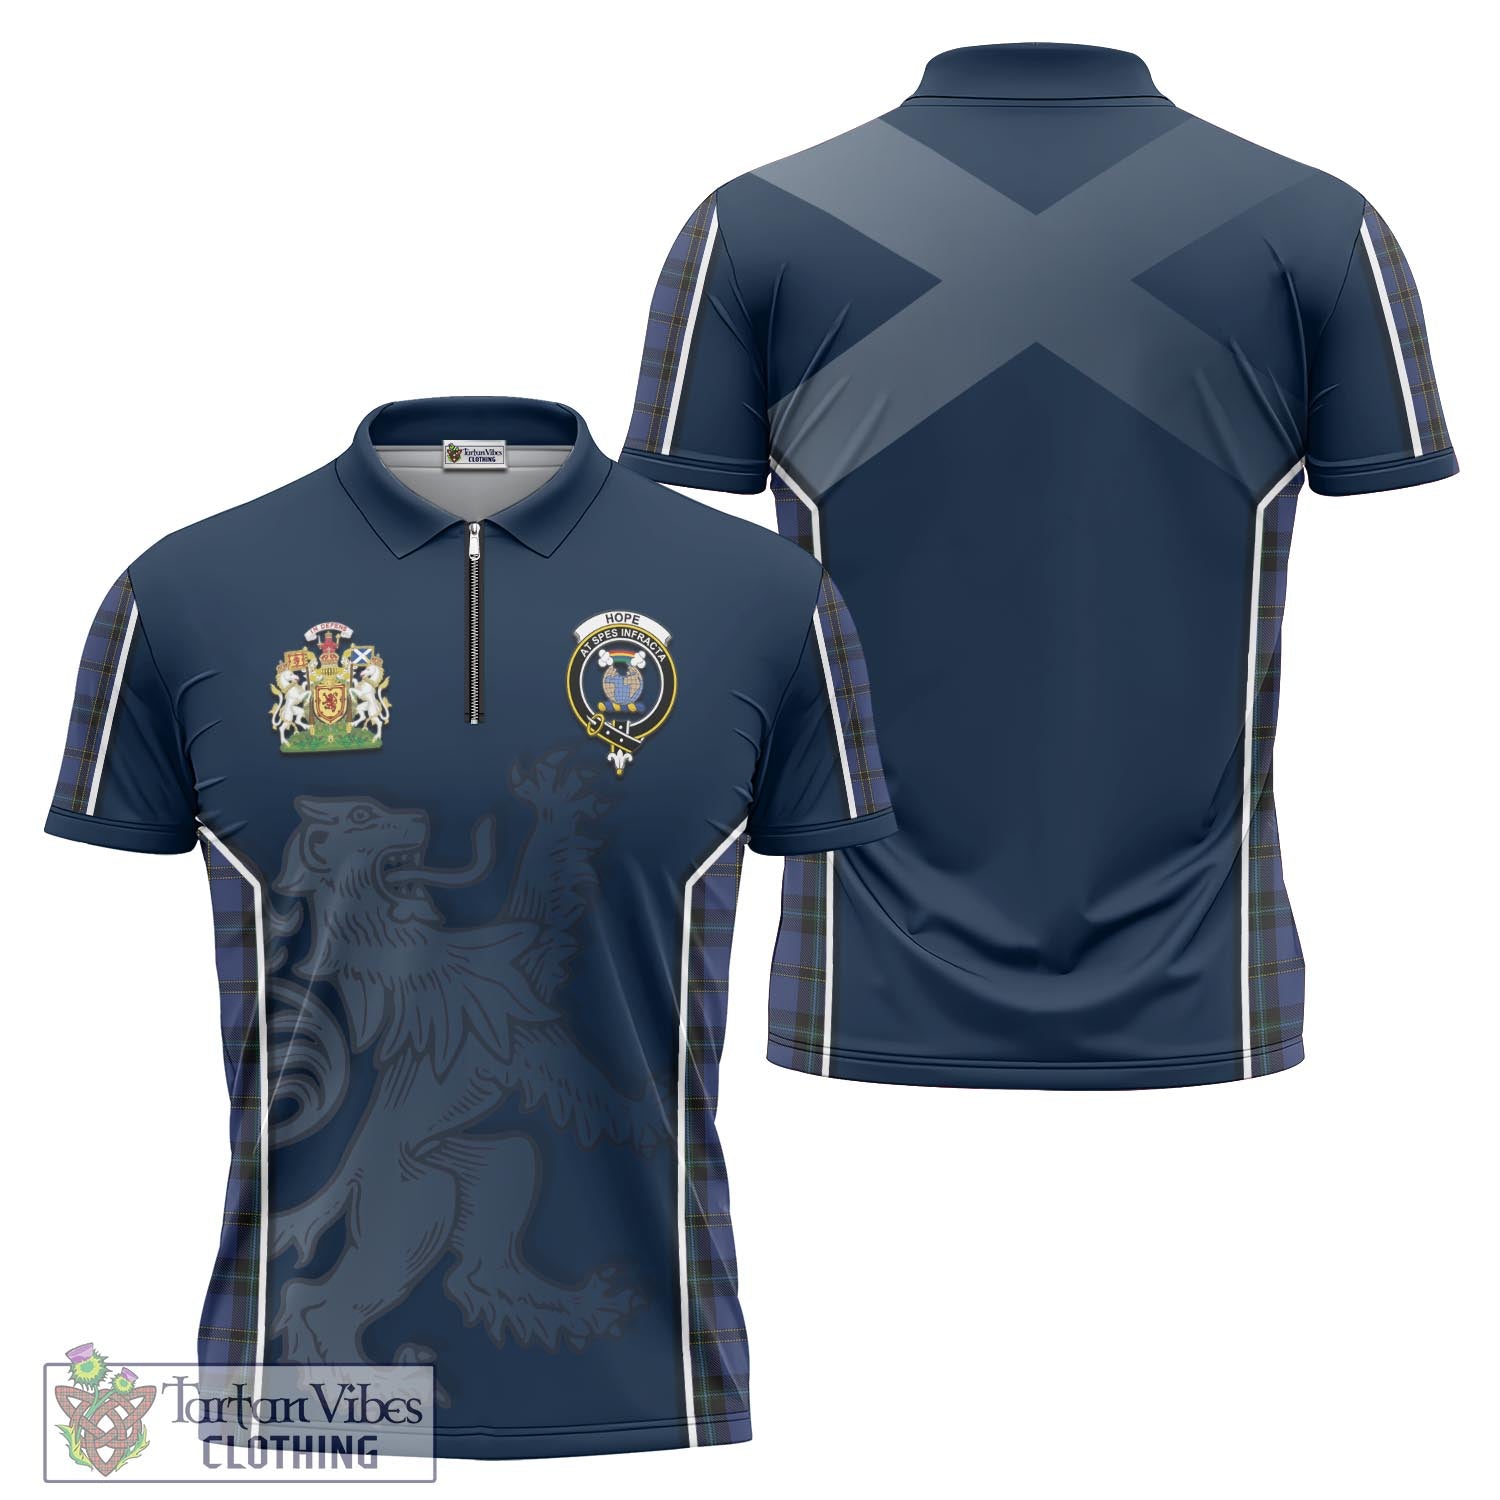 Tartan Vibes Clothing Hope (Vere-Weir) Tartan Zipper Polo Shirt with Family Crest and Lion Rampant Vibes Sport Style